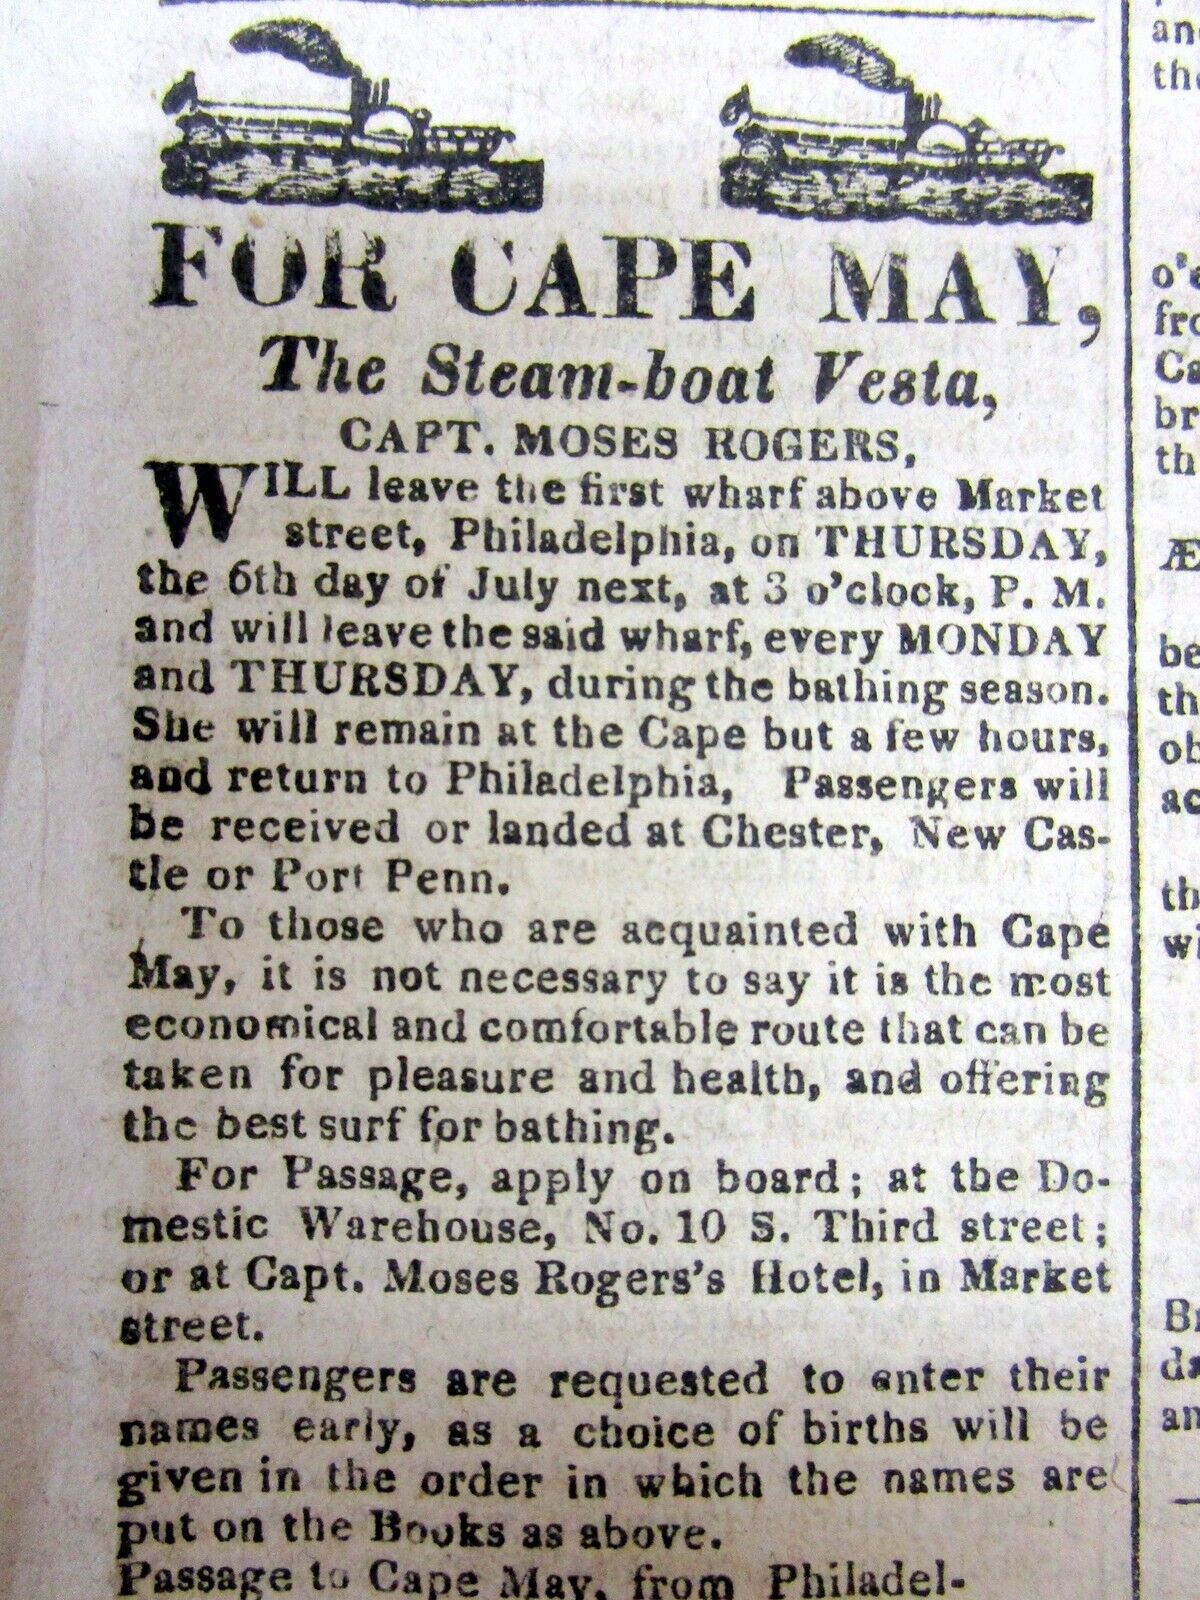 1820 newspaper with illustrated front page ad CAPE MAY FERRY from PHILADELPHIA